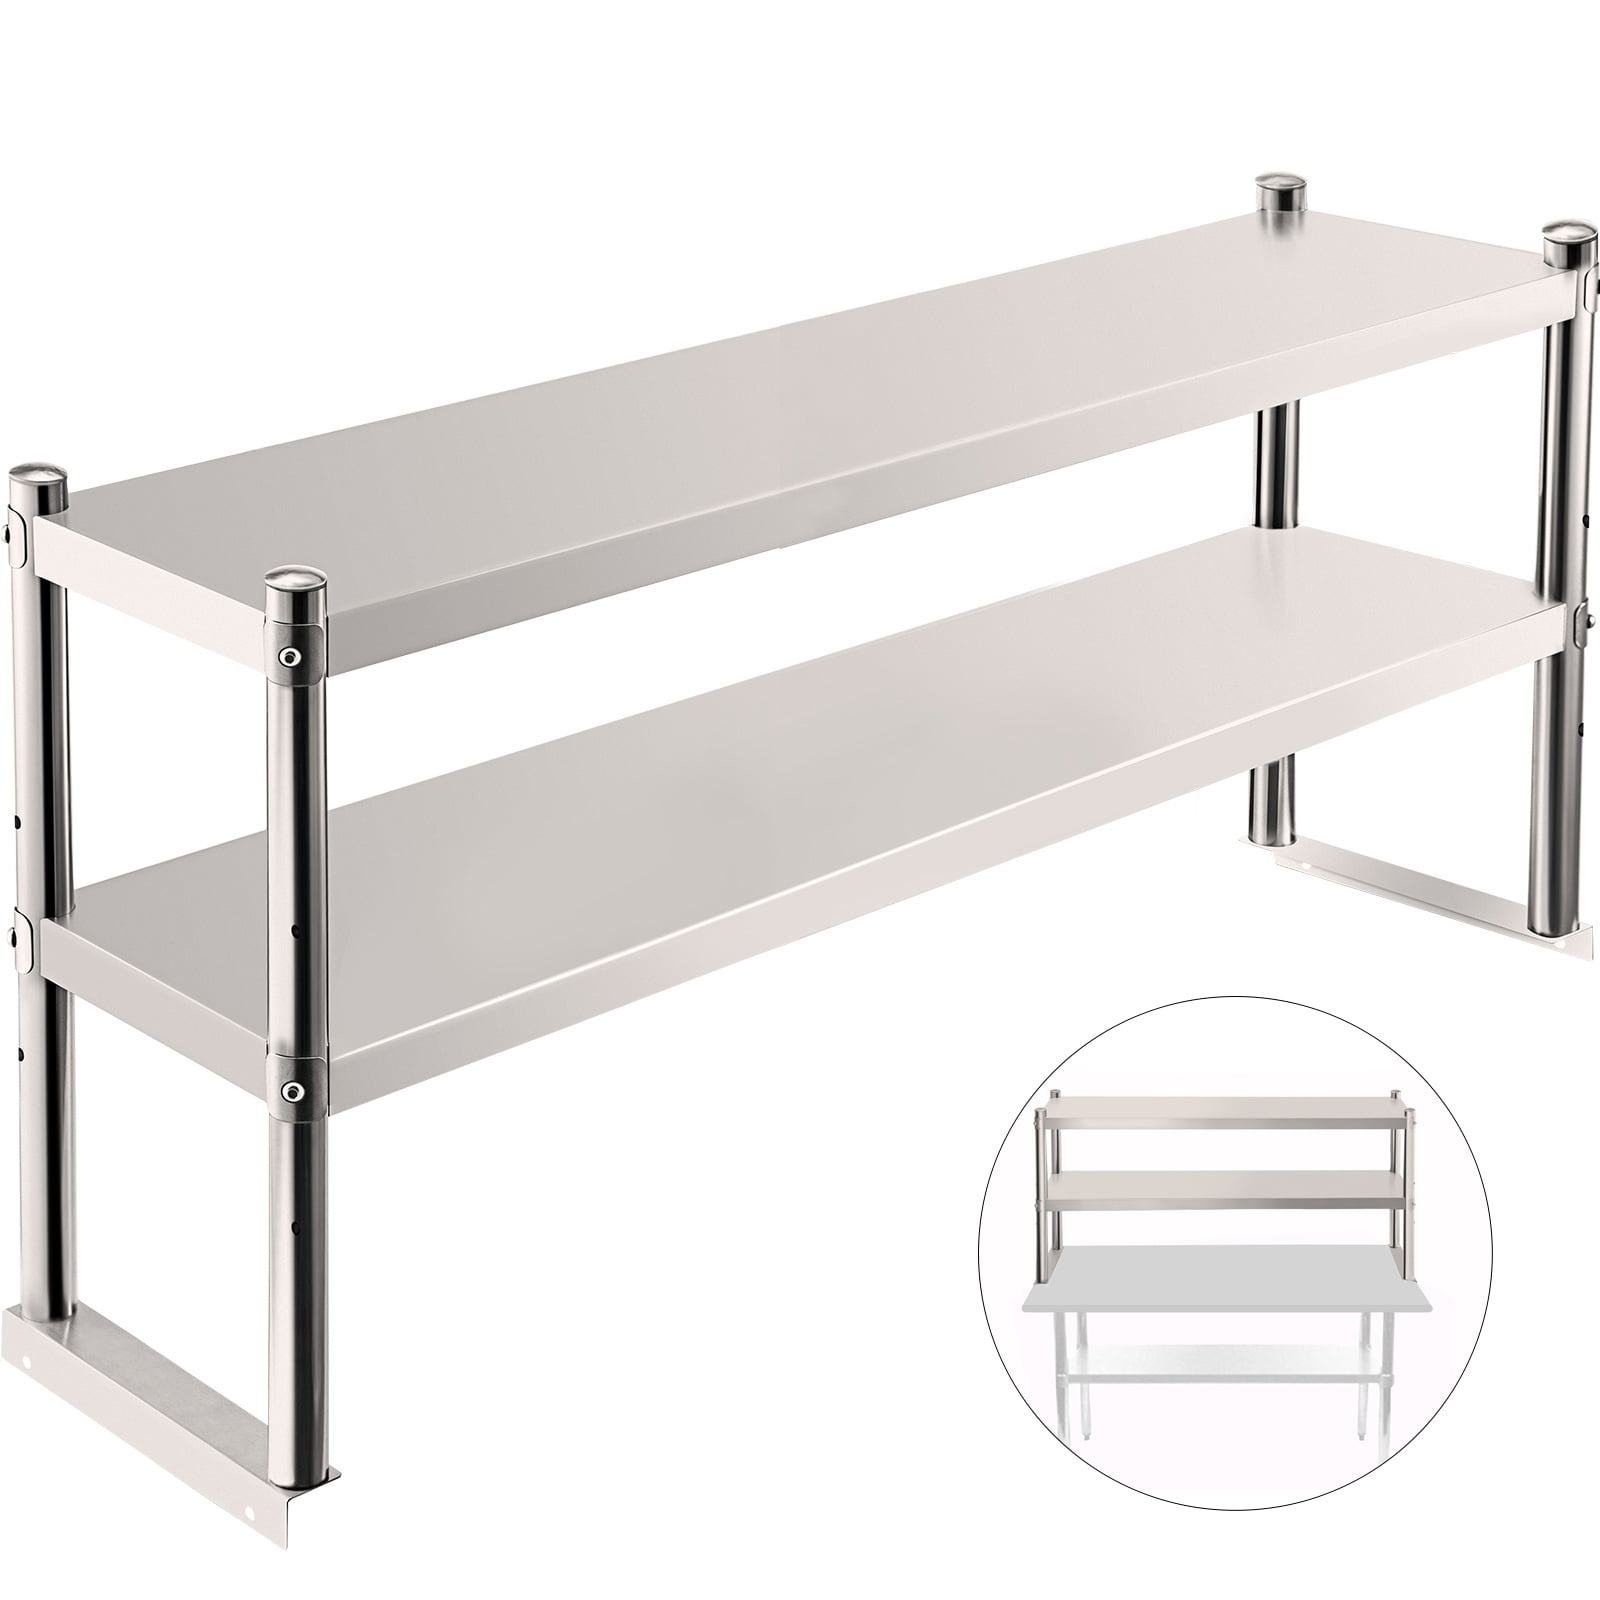 Fits for use in Restaurant 12 x 96 x 19 1/4 Warehouse Kitchen Home Stainless Steel Single Deck Overshelf Garage. Business 